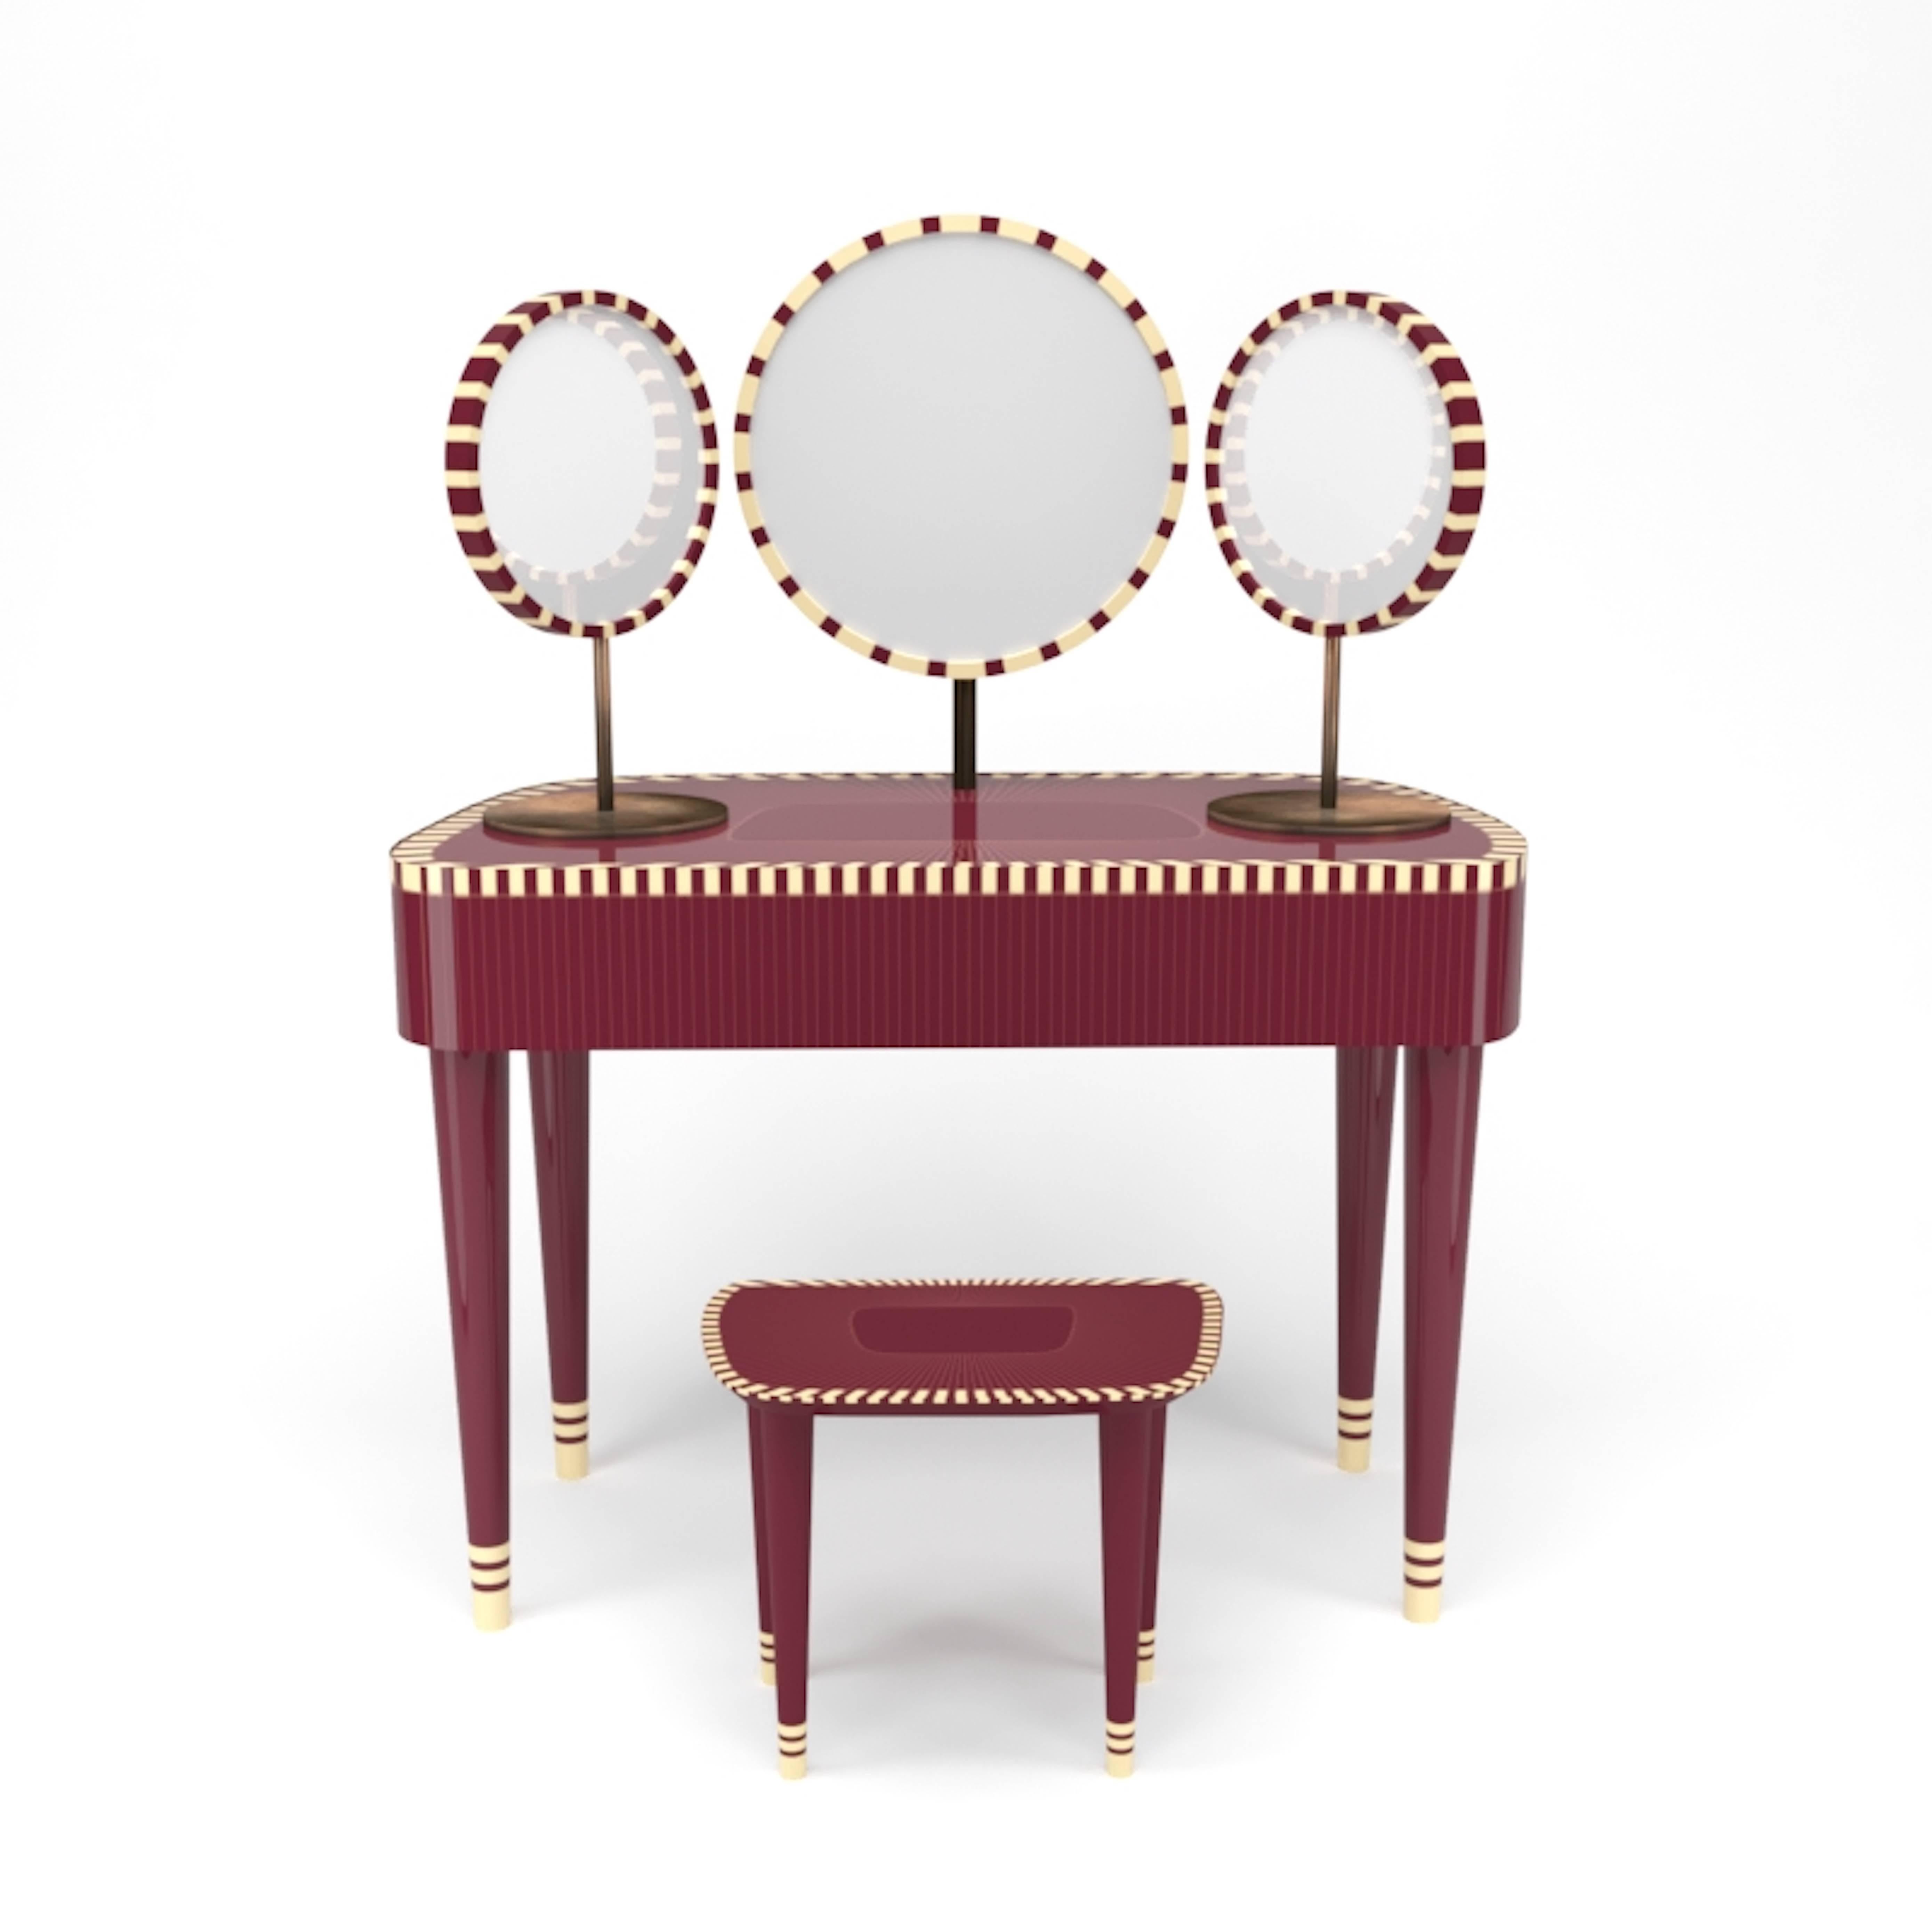 Vanilla noir is scarlet splendour’s debut collection designed by Italian designer Matteo Cibic.

The furniture collection is inspired by Indian handicraft of bone and Horn inlay and translated into a contemporary fusion of modern polymers and